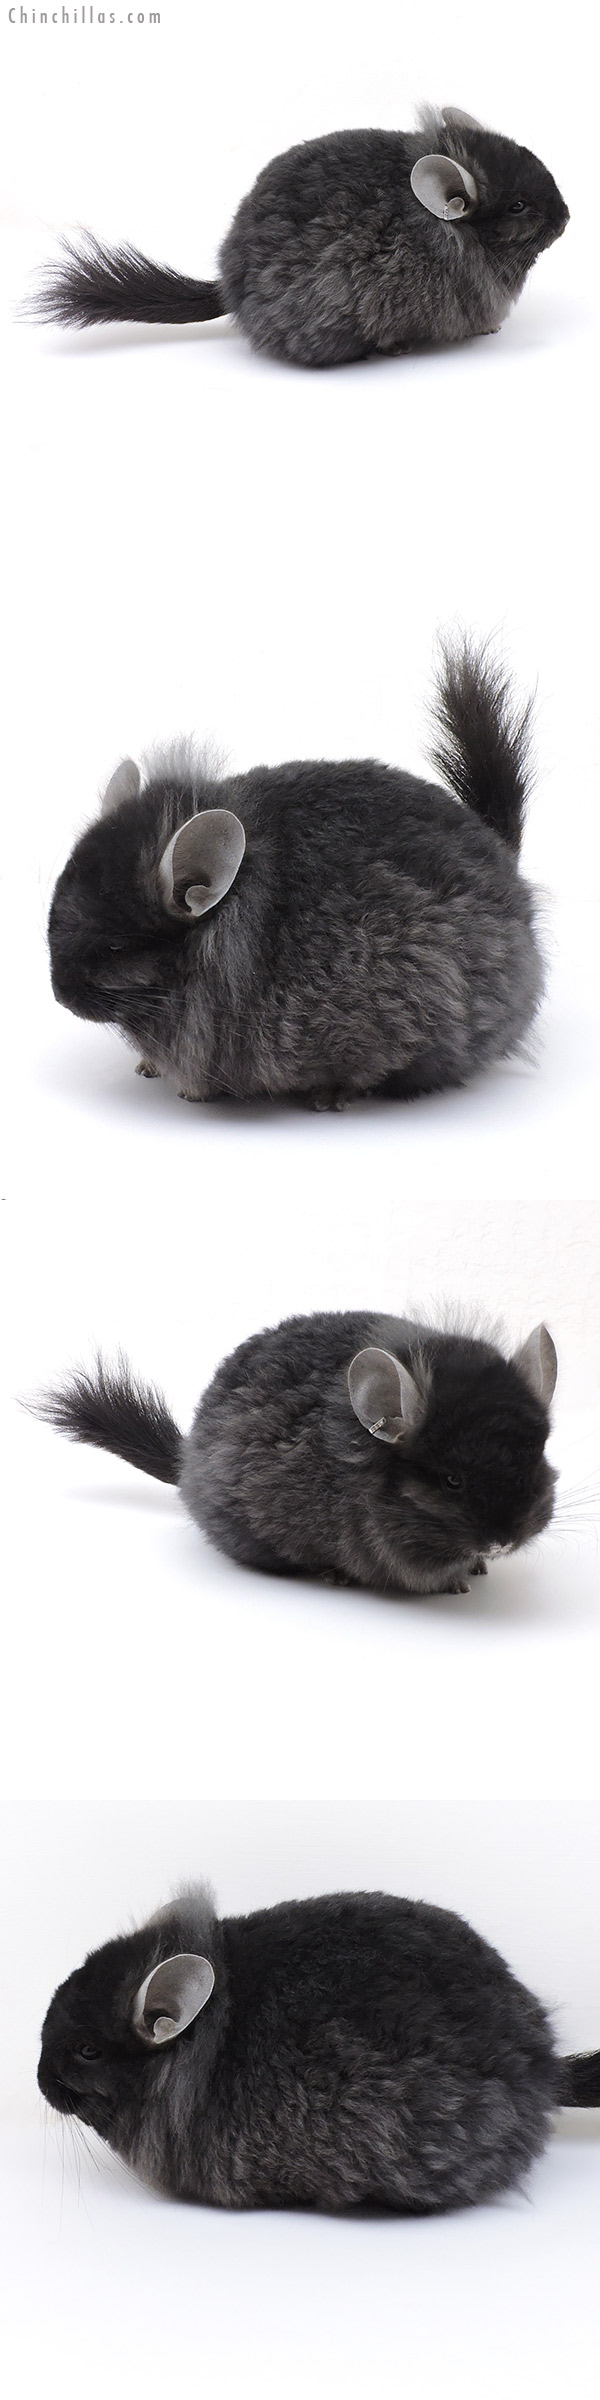 Chinchilla or related item offered for sale or export on Chinchillas.com - 17028 Exceptional Ebony  Royal Imperial Angora Male Chinchilla with Lion Mane